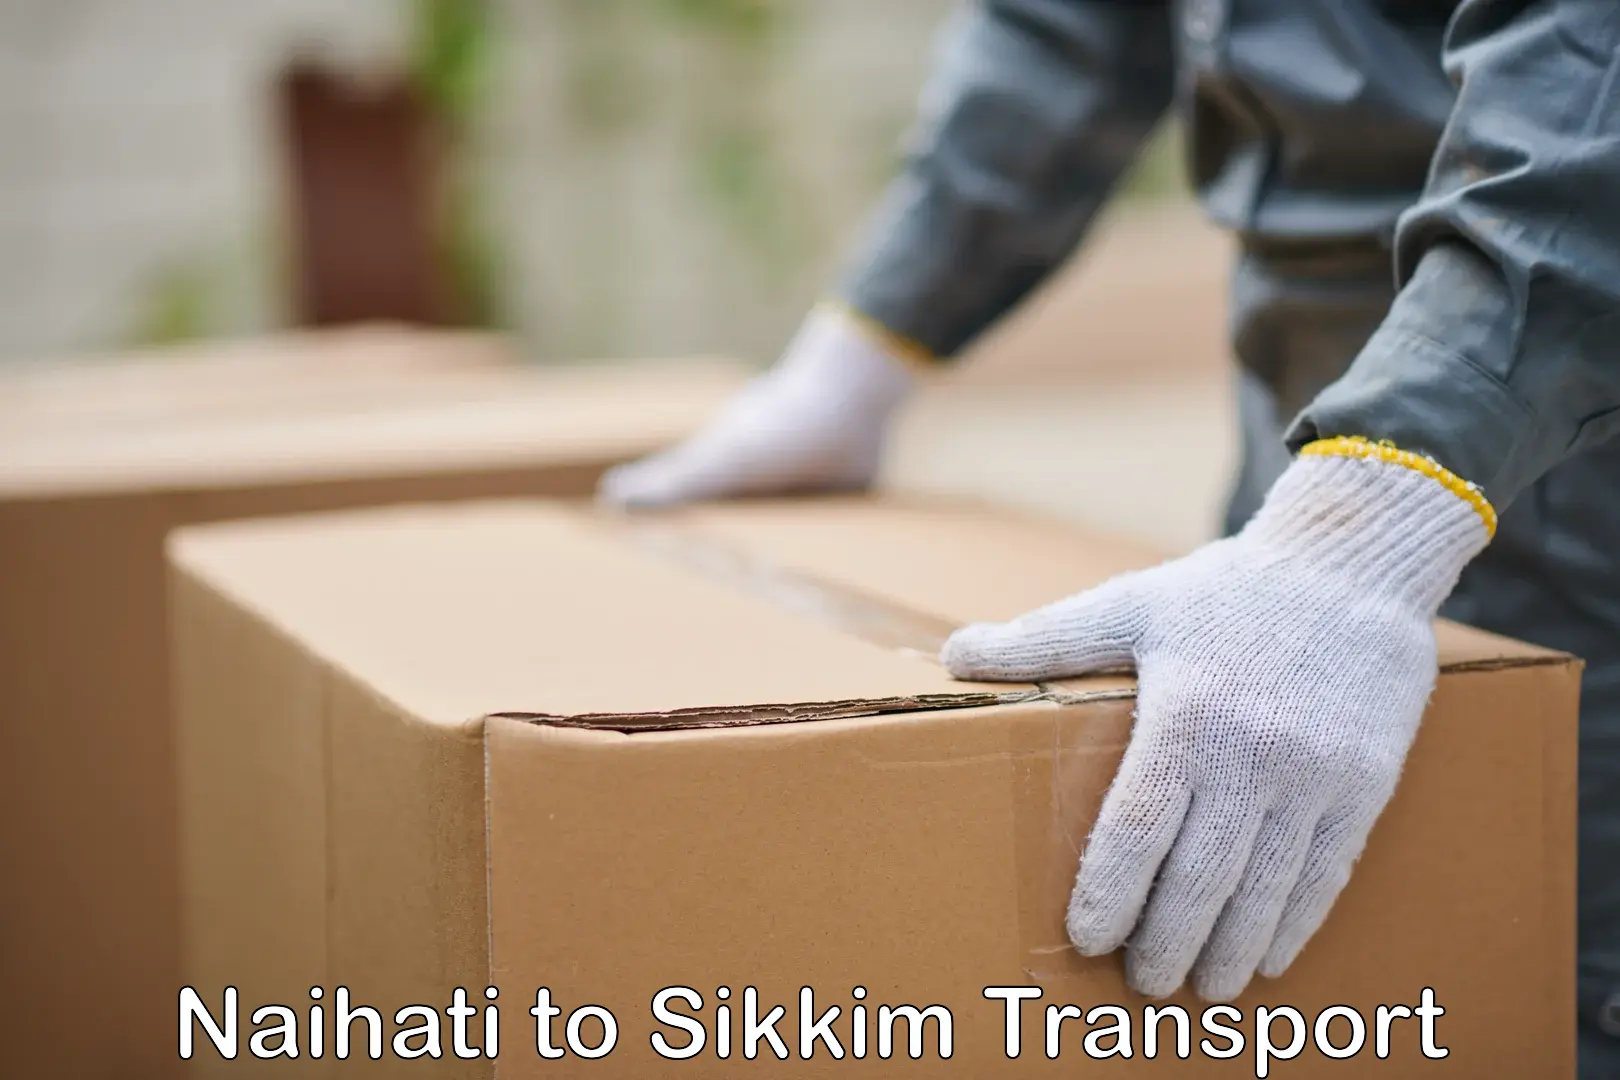 Air freight transport services in Naihati to Pelling